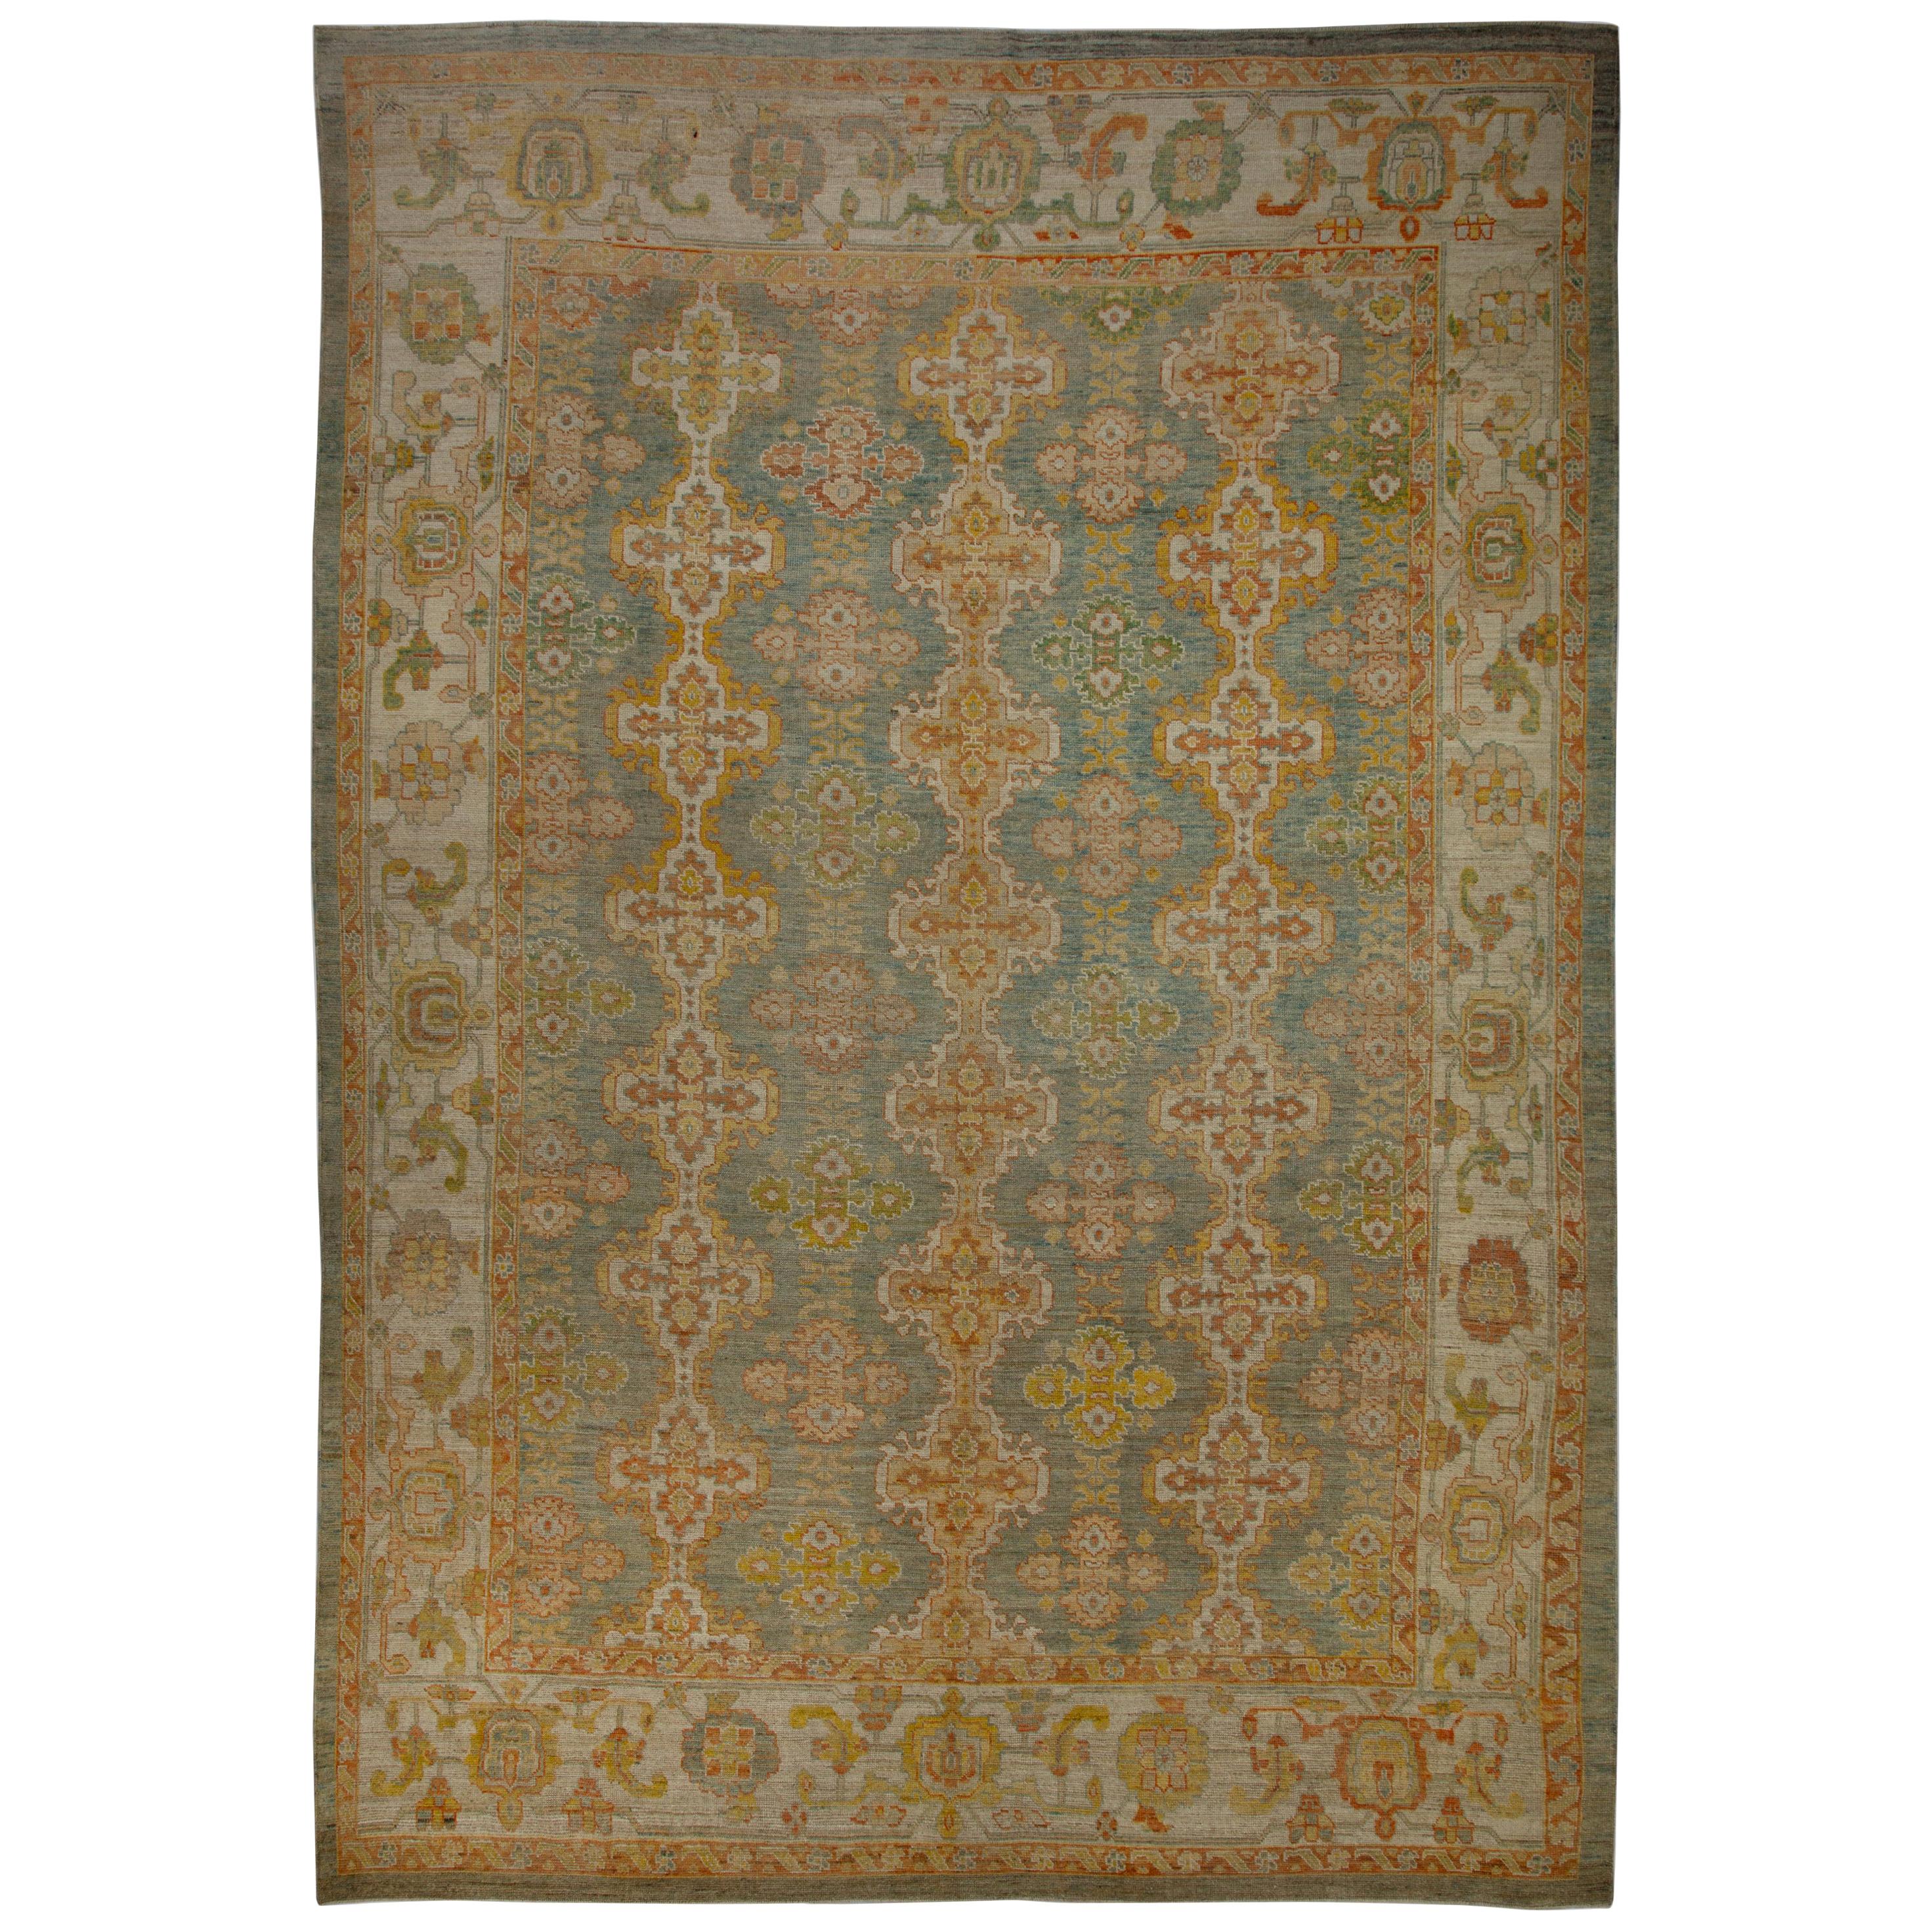 Contemporary Turkish Oushak Rug in Ivory and Green with Flower Medallions